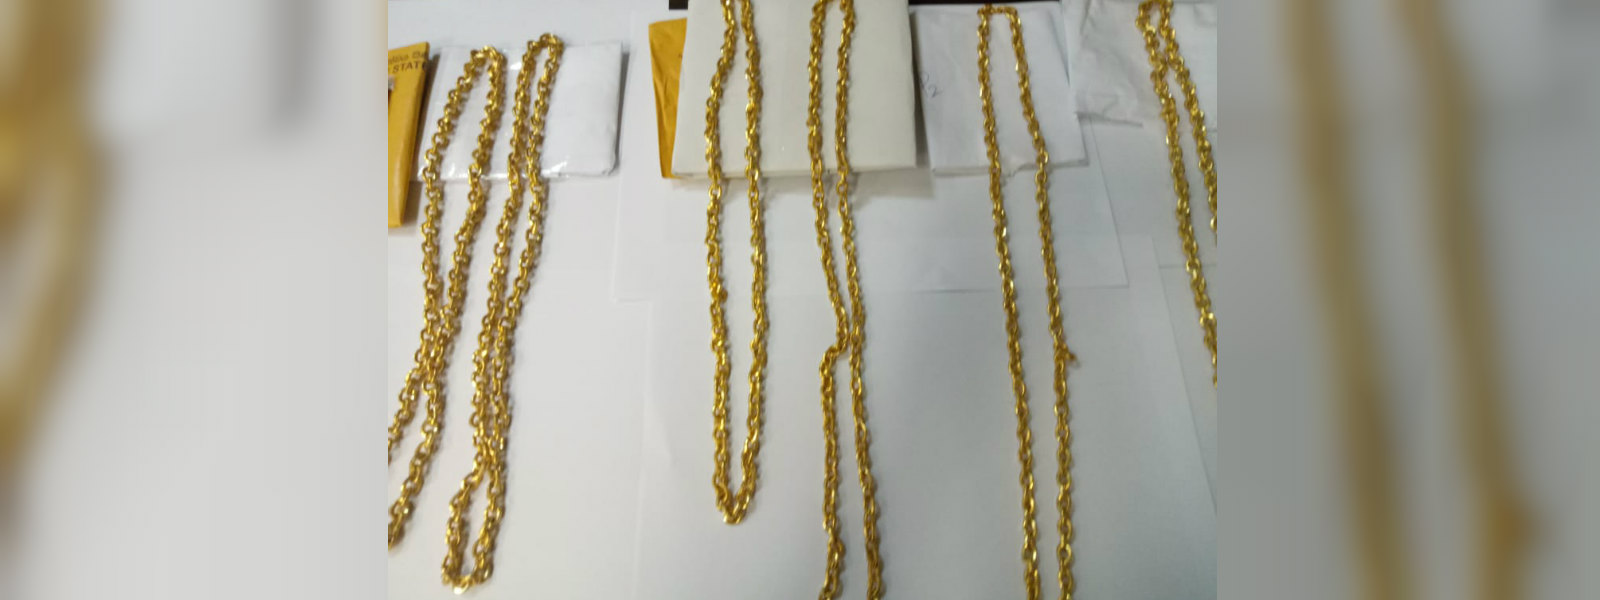 14 Sri Lankans arrested with Gold worth Rs. 32Mn at BIA